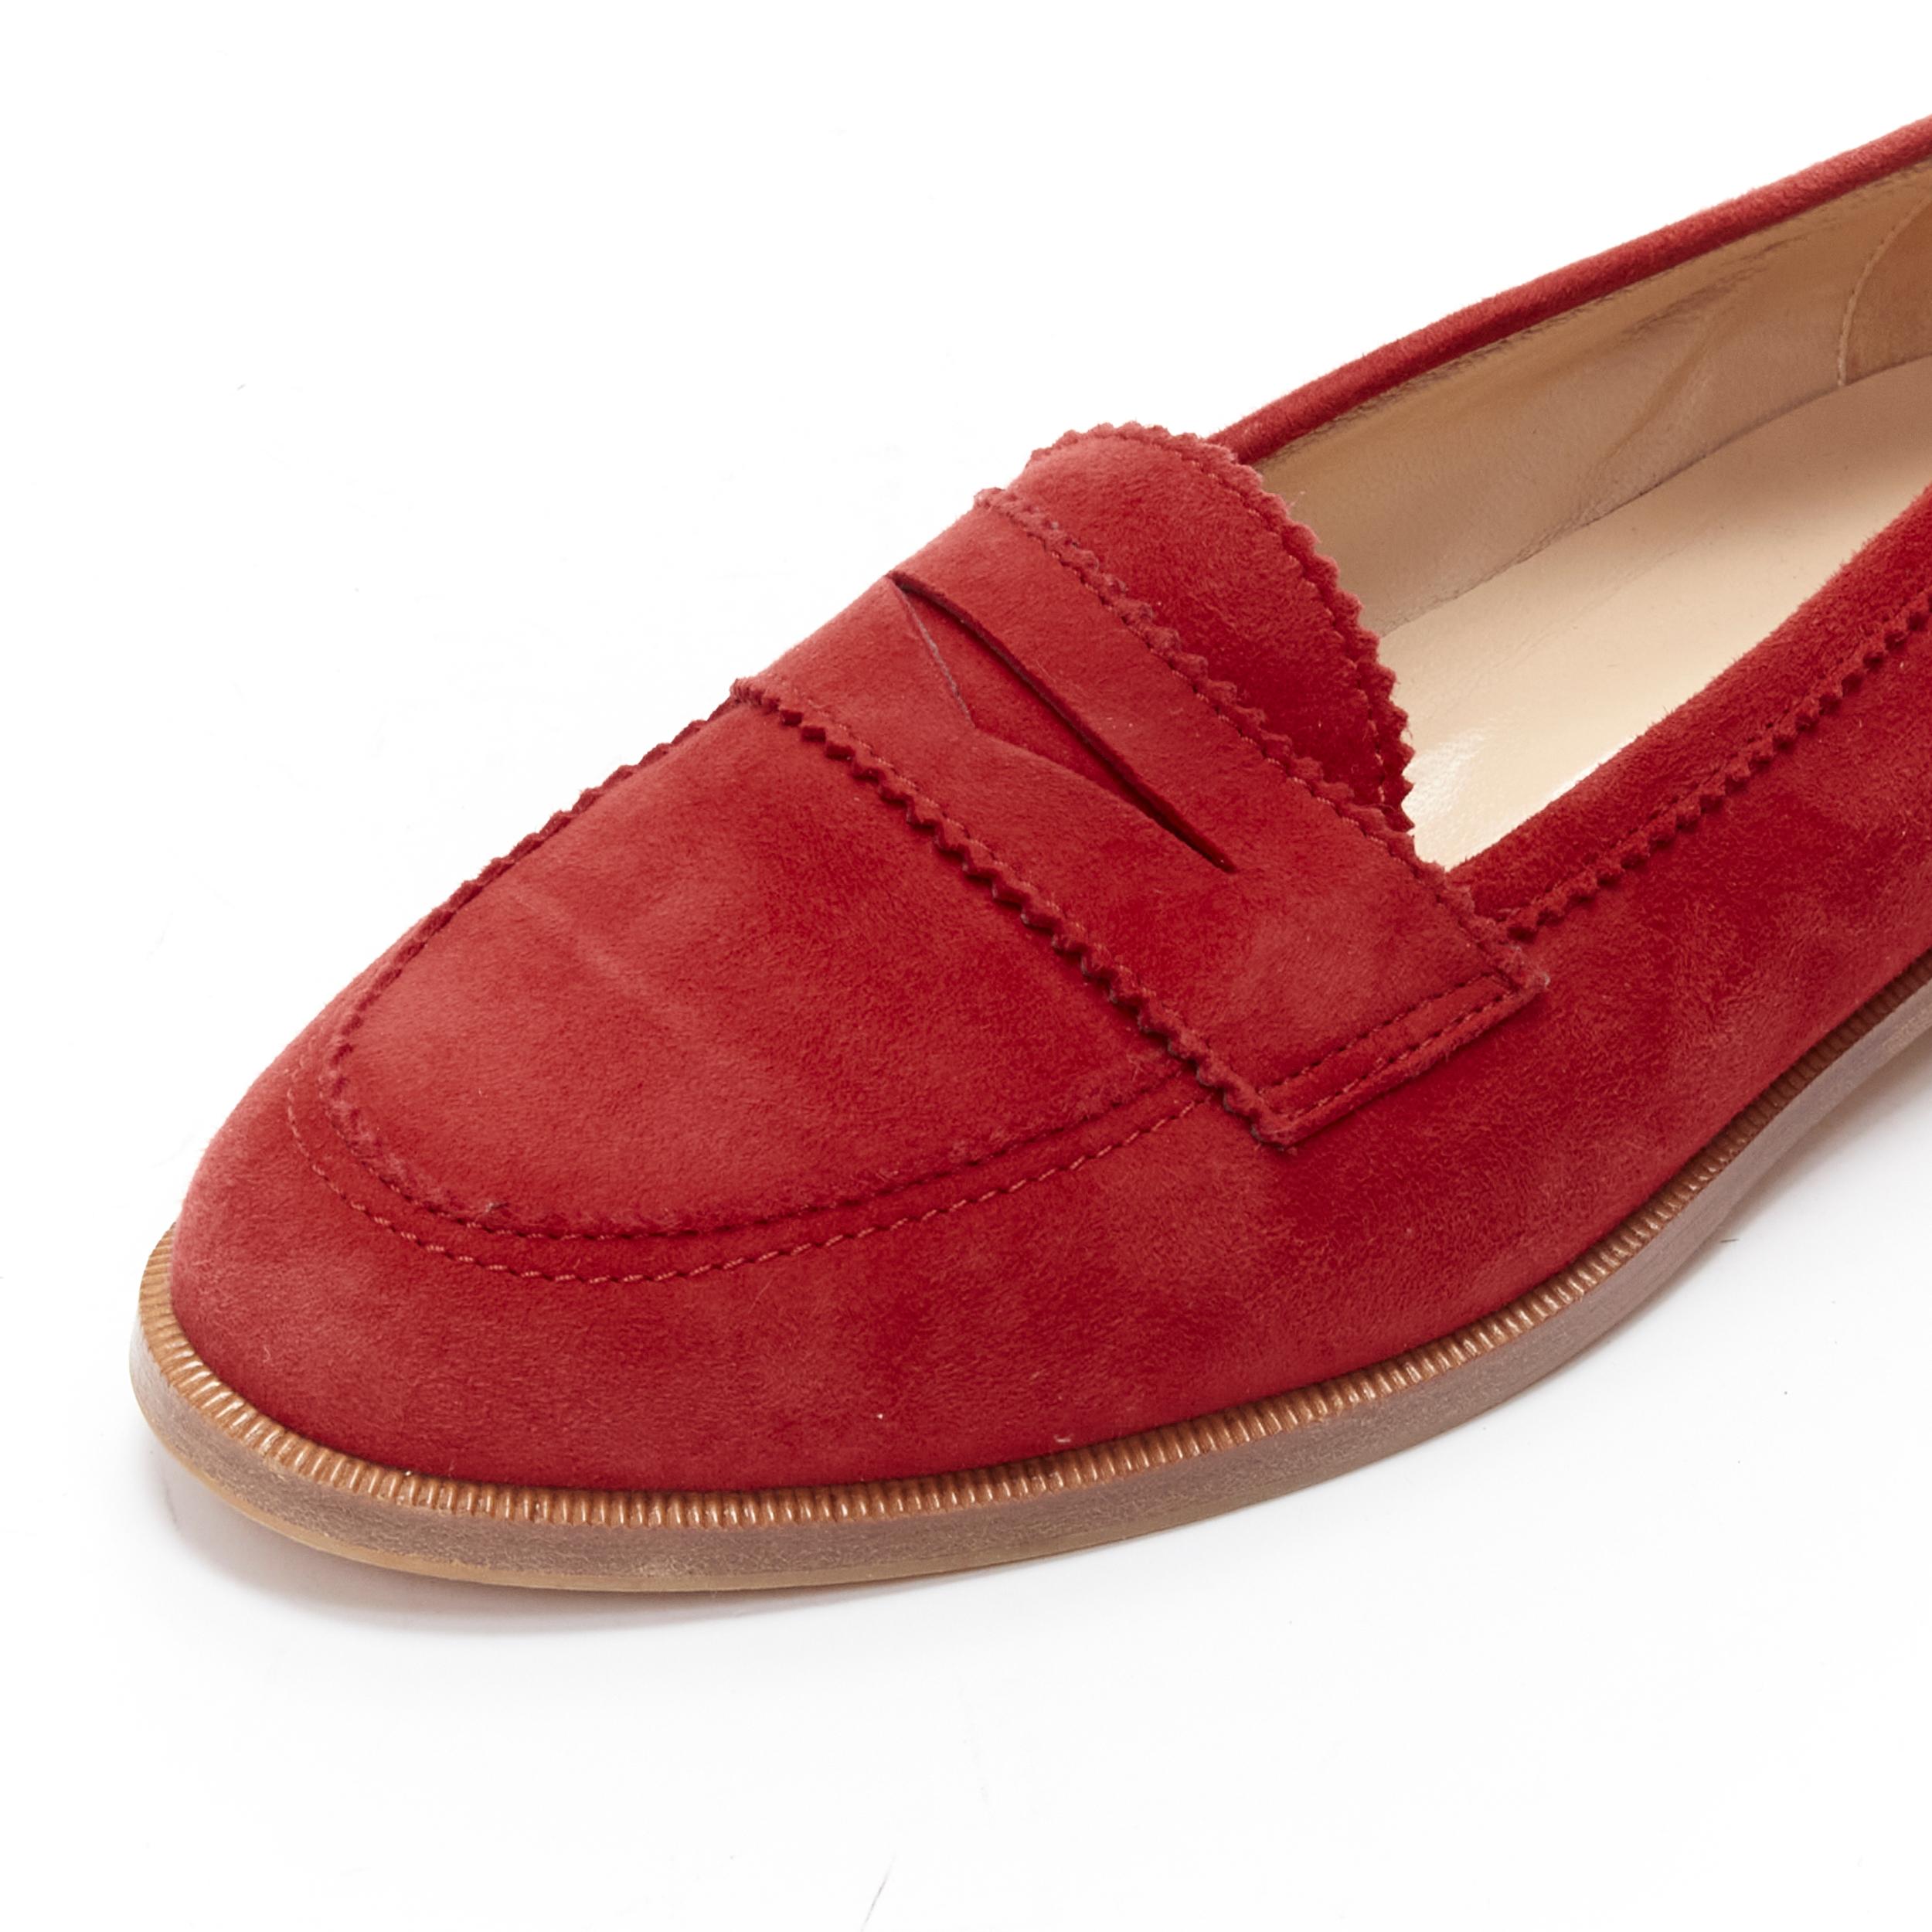 MANOLO BLAHNIK red suede leather classic penny loafer EU37 For Sale 2